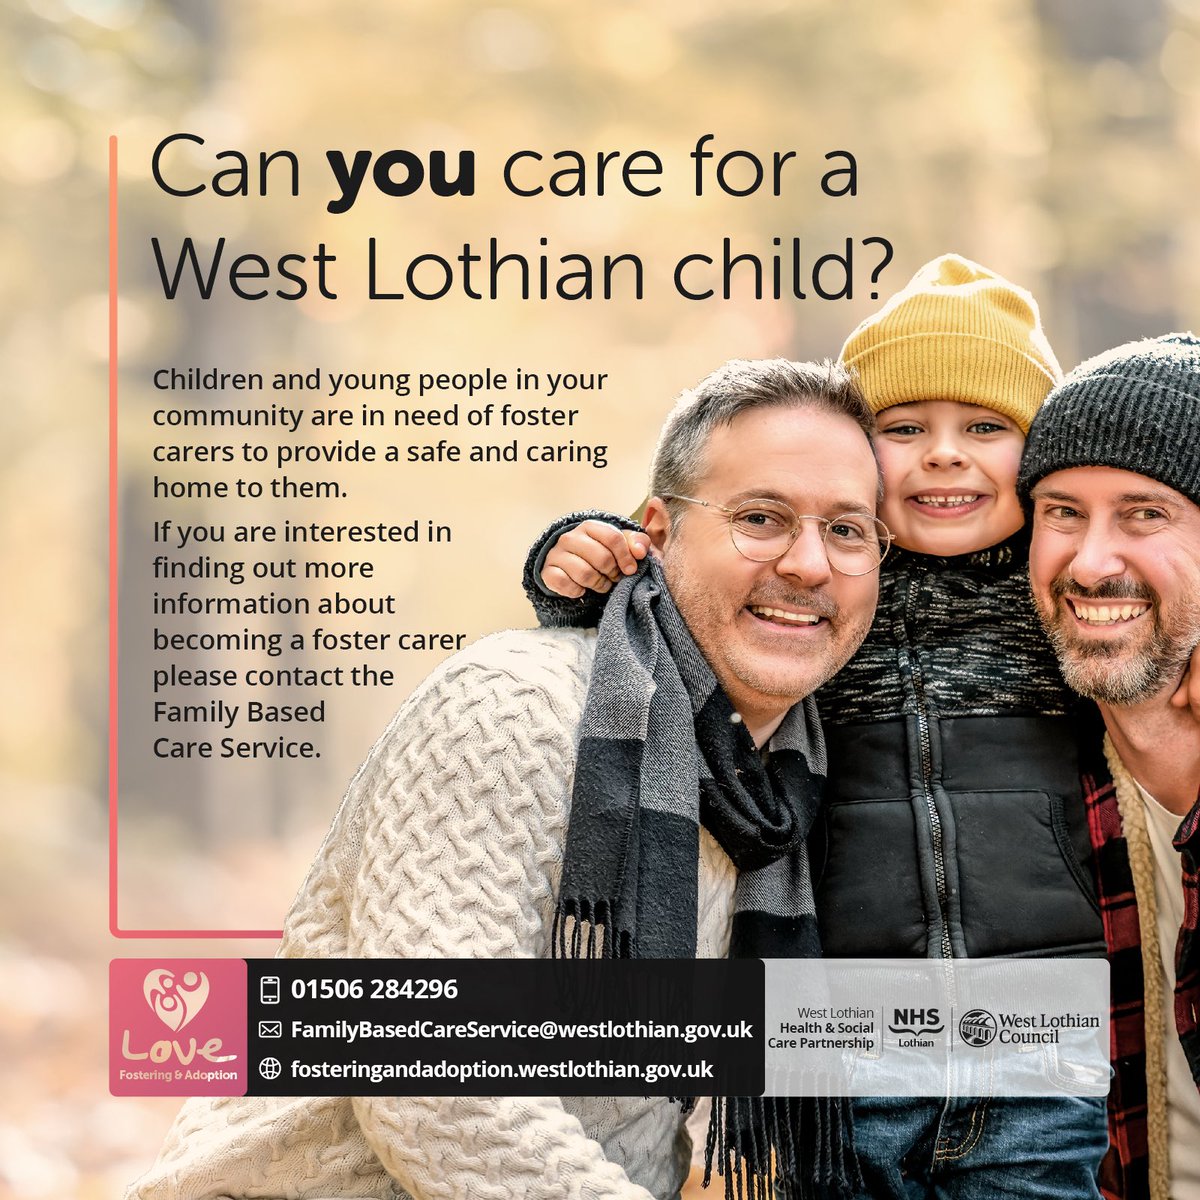 Can YOU care for a West Lothian Child? West Lothian Council’s Family Based Care Service are currently looking for carers to support West Lothian children and young people.